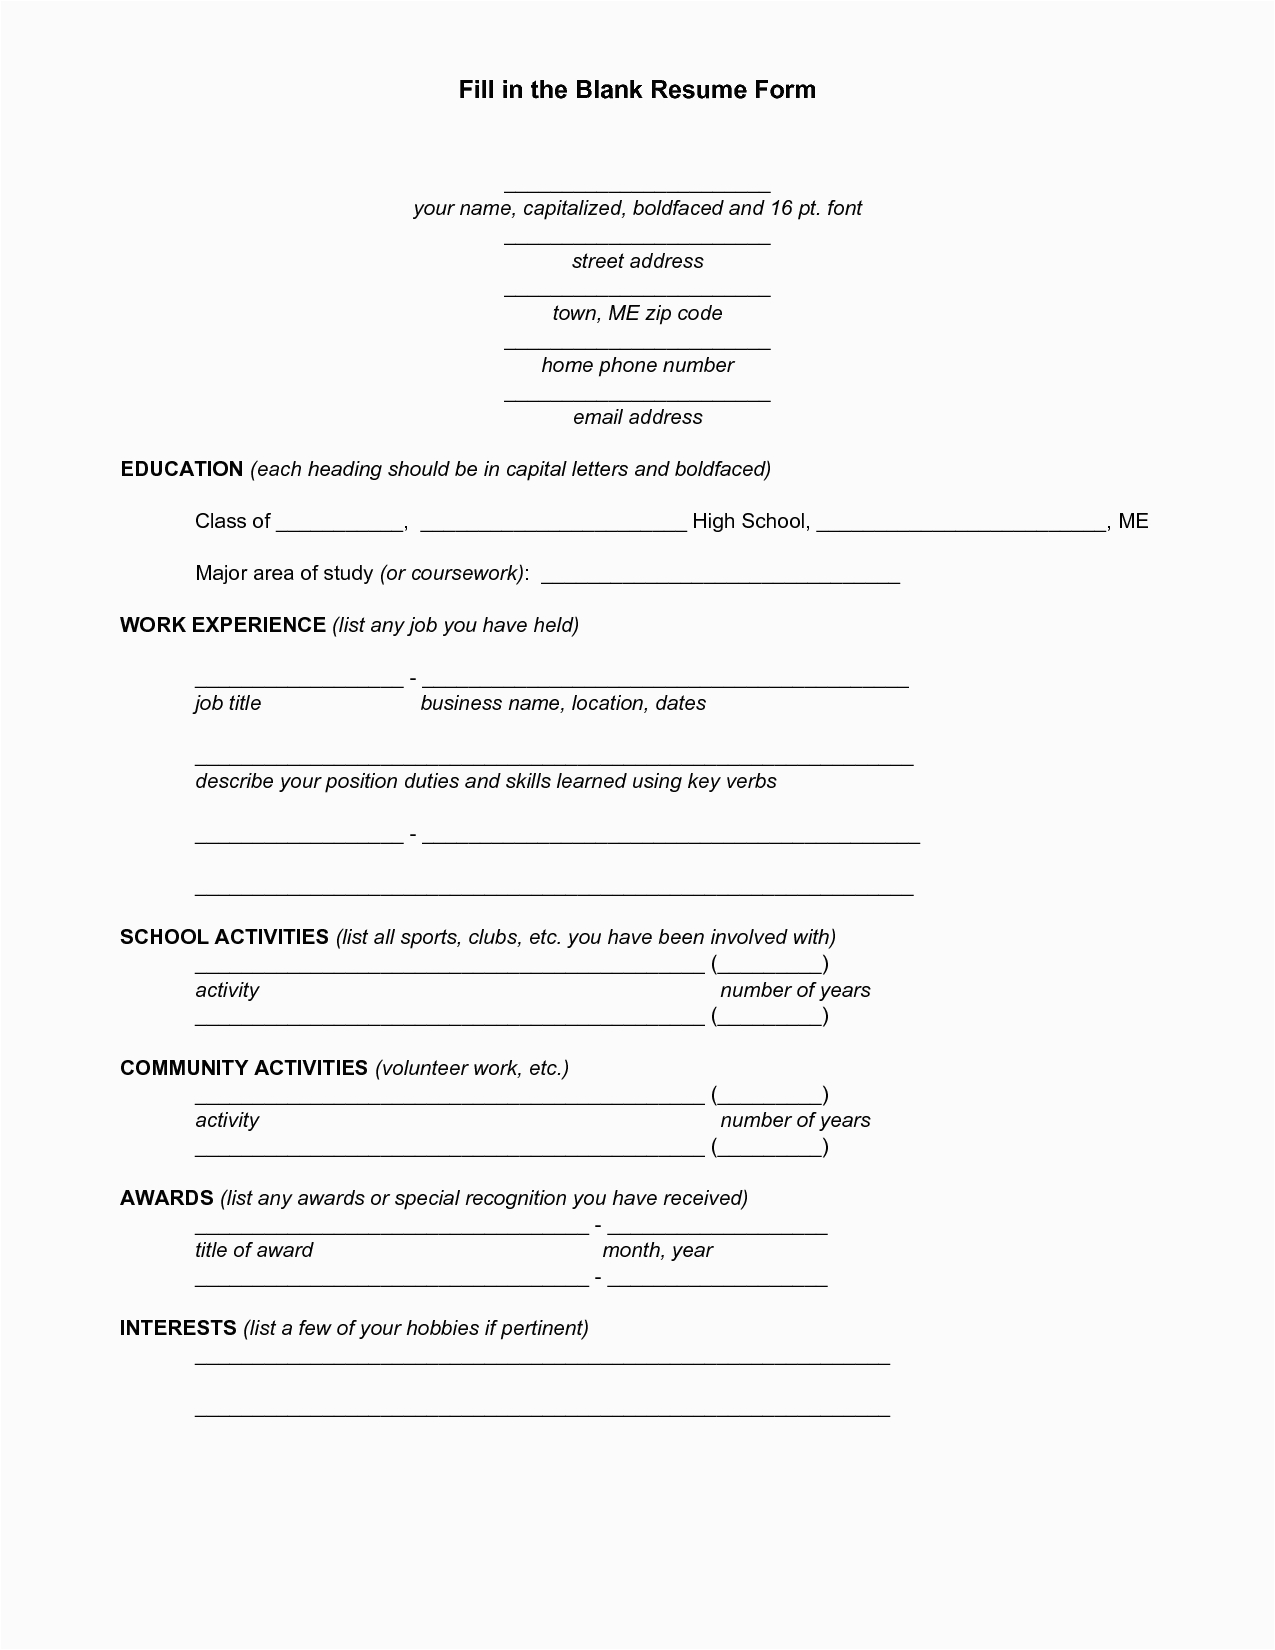 Resume Templates Fill In the Blanks Free Resume Templates You Can Fill In Resume